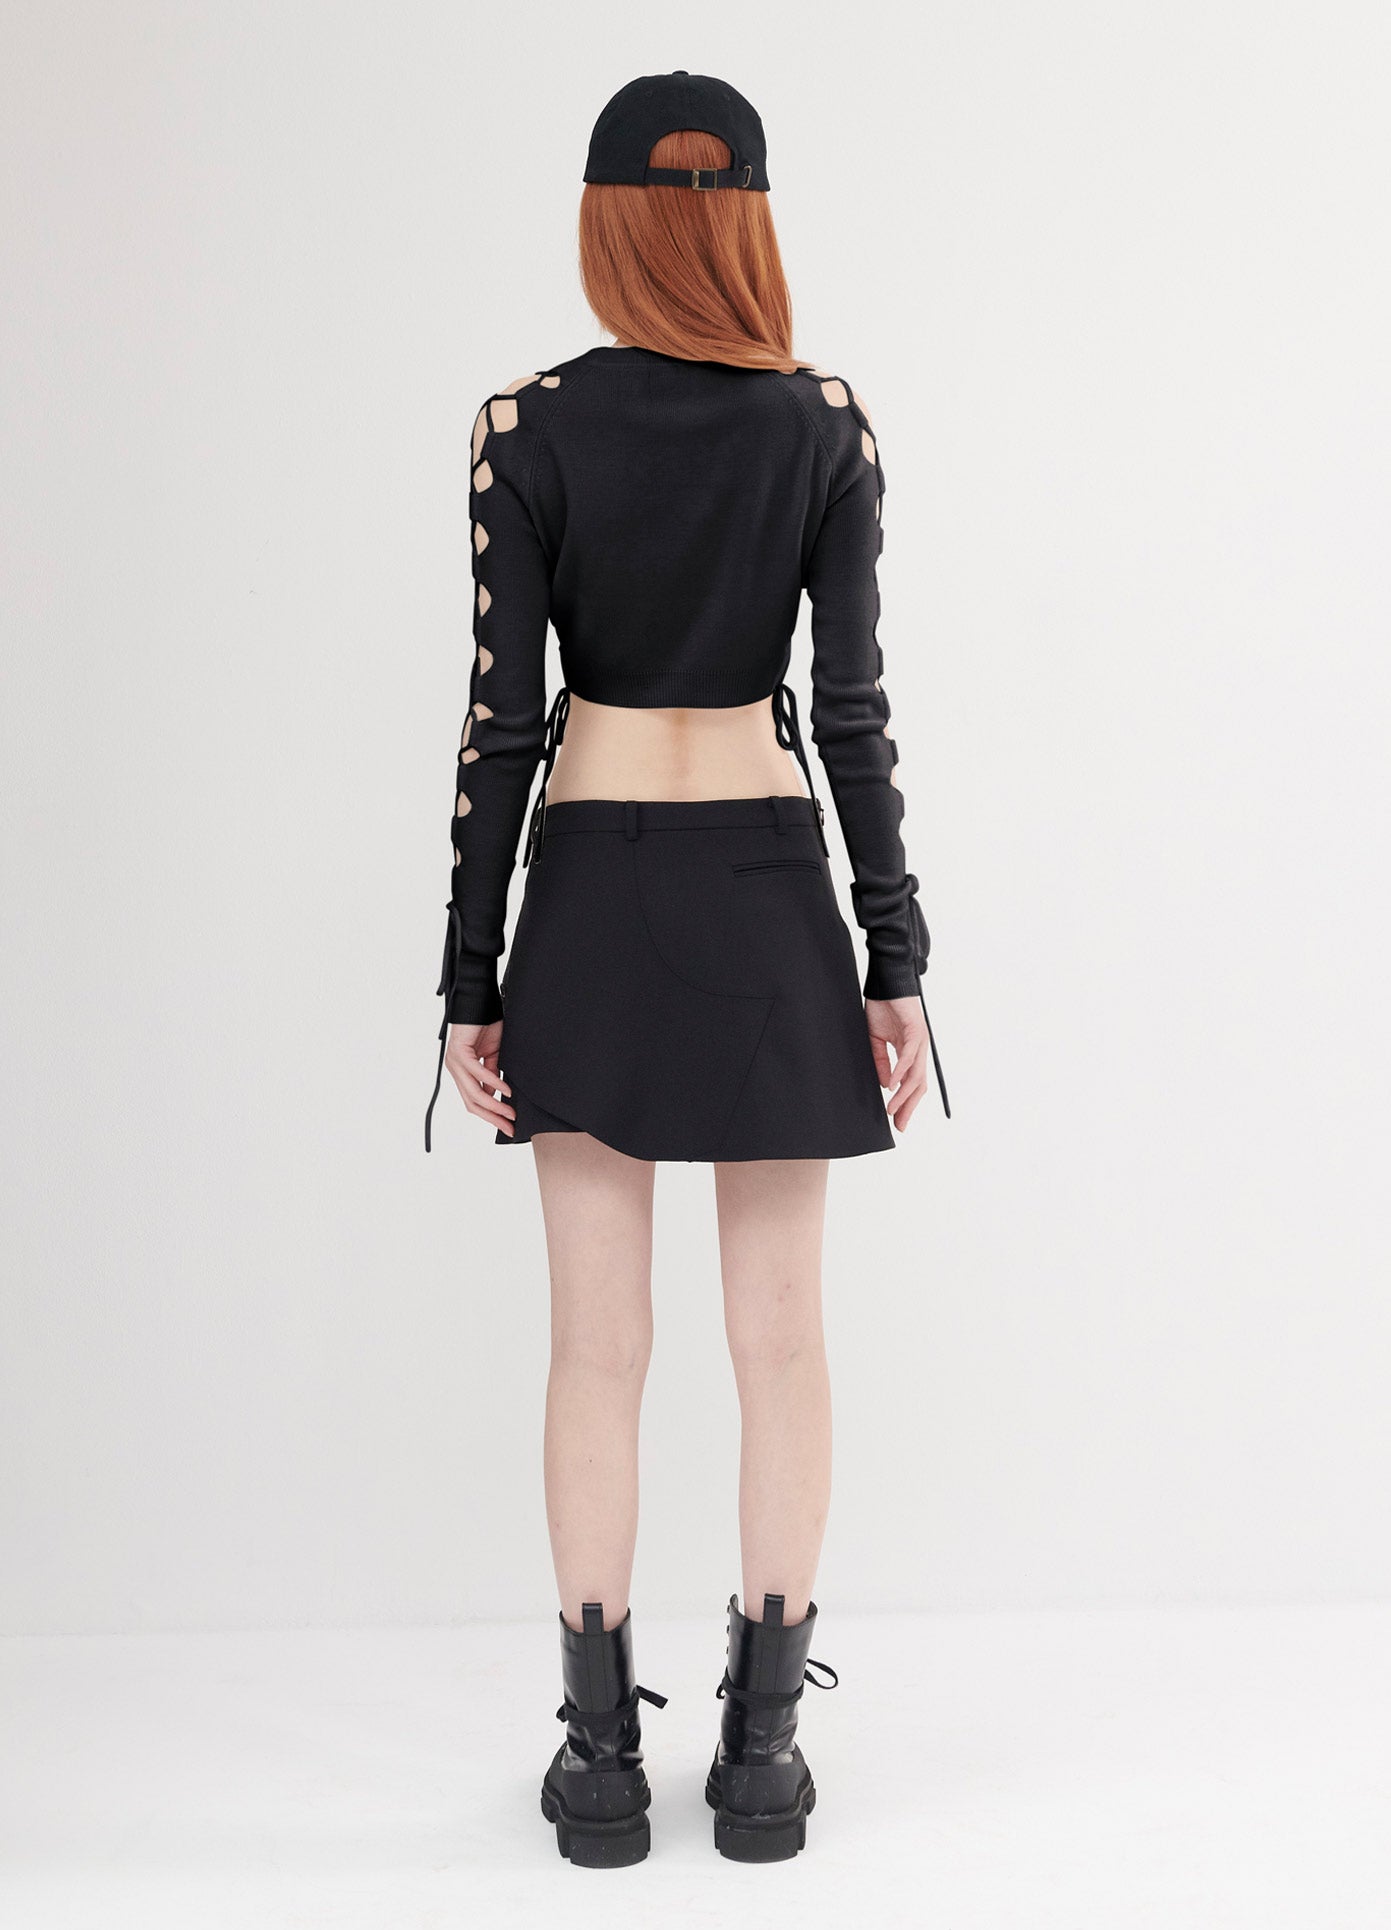 MONSE Lacing Sleeve Detail Cropped Sweater in black on model back view